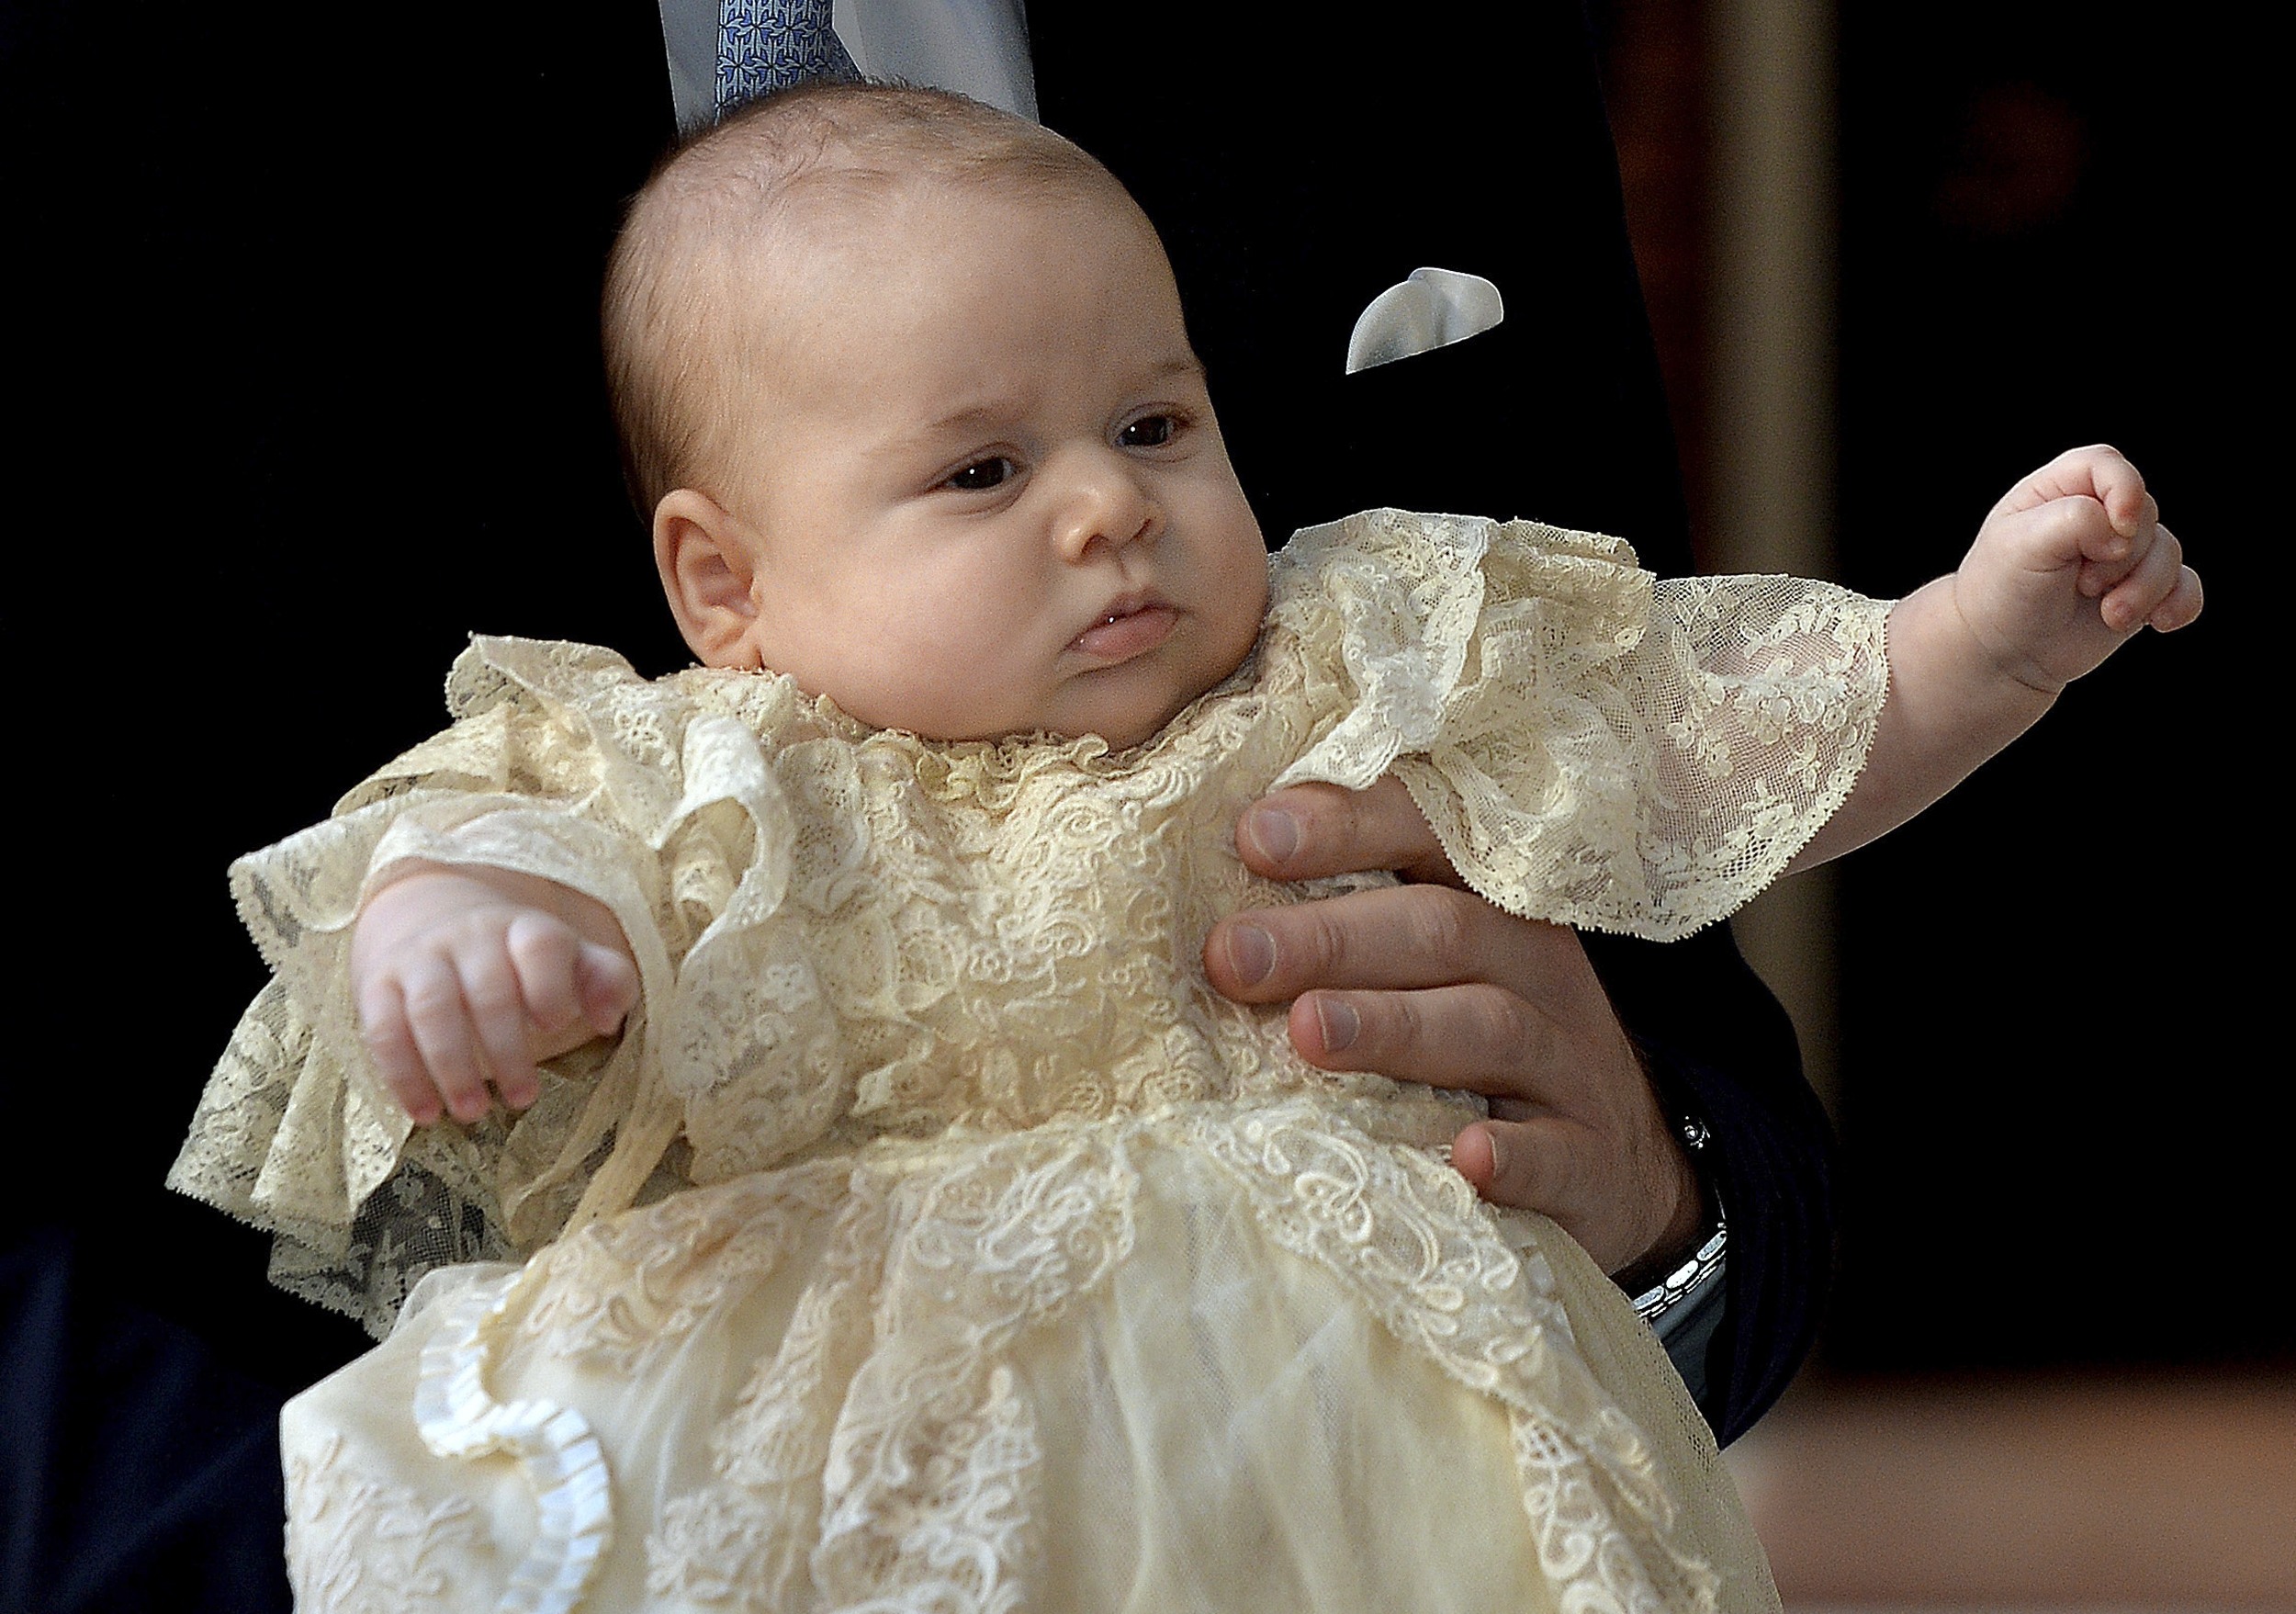 Britain's Prince William carries his son Prince George as they arrive for his son's christening at St James's Palace in London Photo: REUTERS